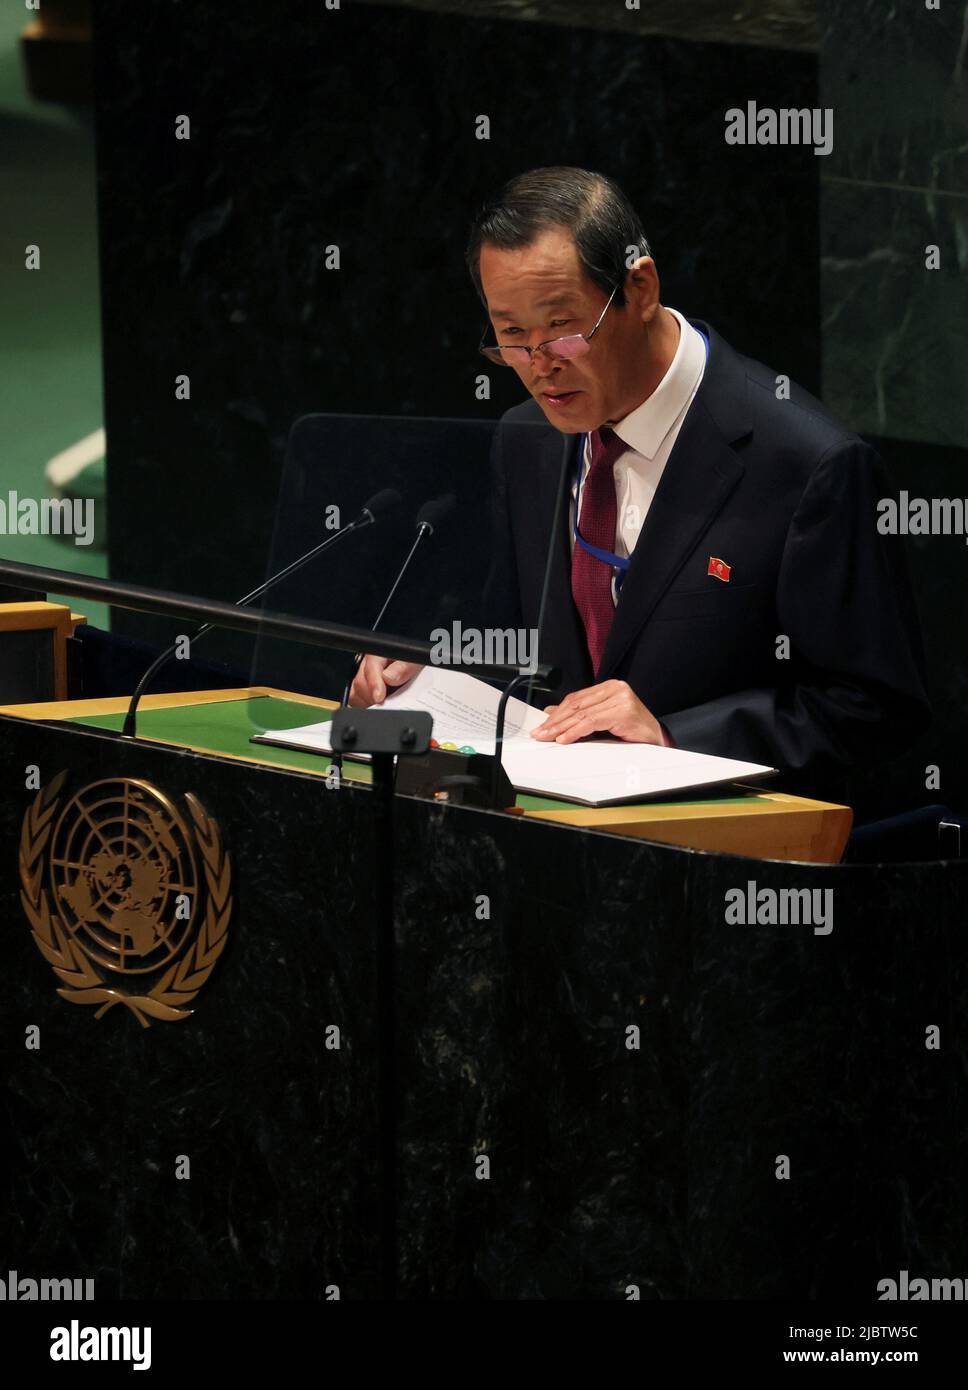 North Korea's Ambassador to the United Nations Kim Song speaks during a meeting of the U.N. General Assembly after China and Russia vetoed new sanctions on North Korea in the U.N. Security Council, at U.N. headquarters in New York City, New York, U.S., June 8, 2022. REUTERS/Mike Segar Stock Photo